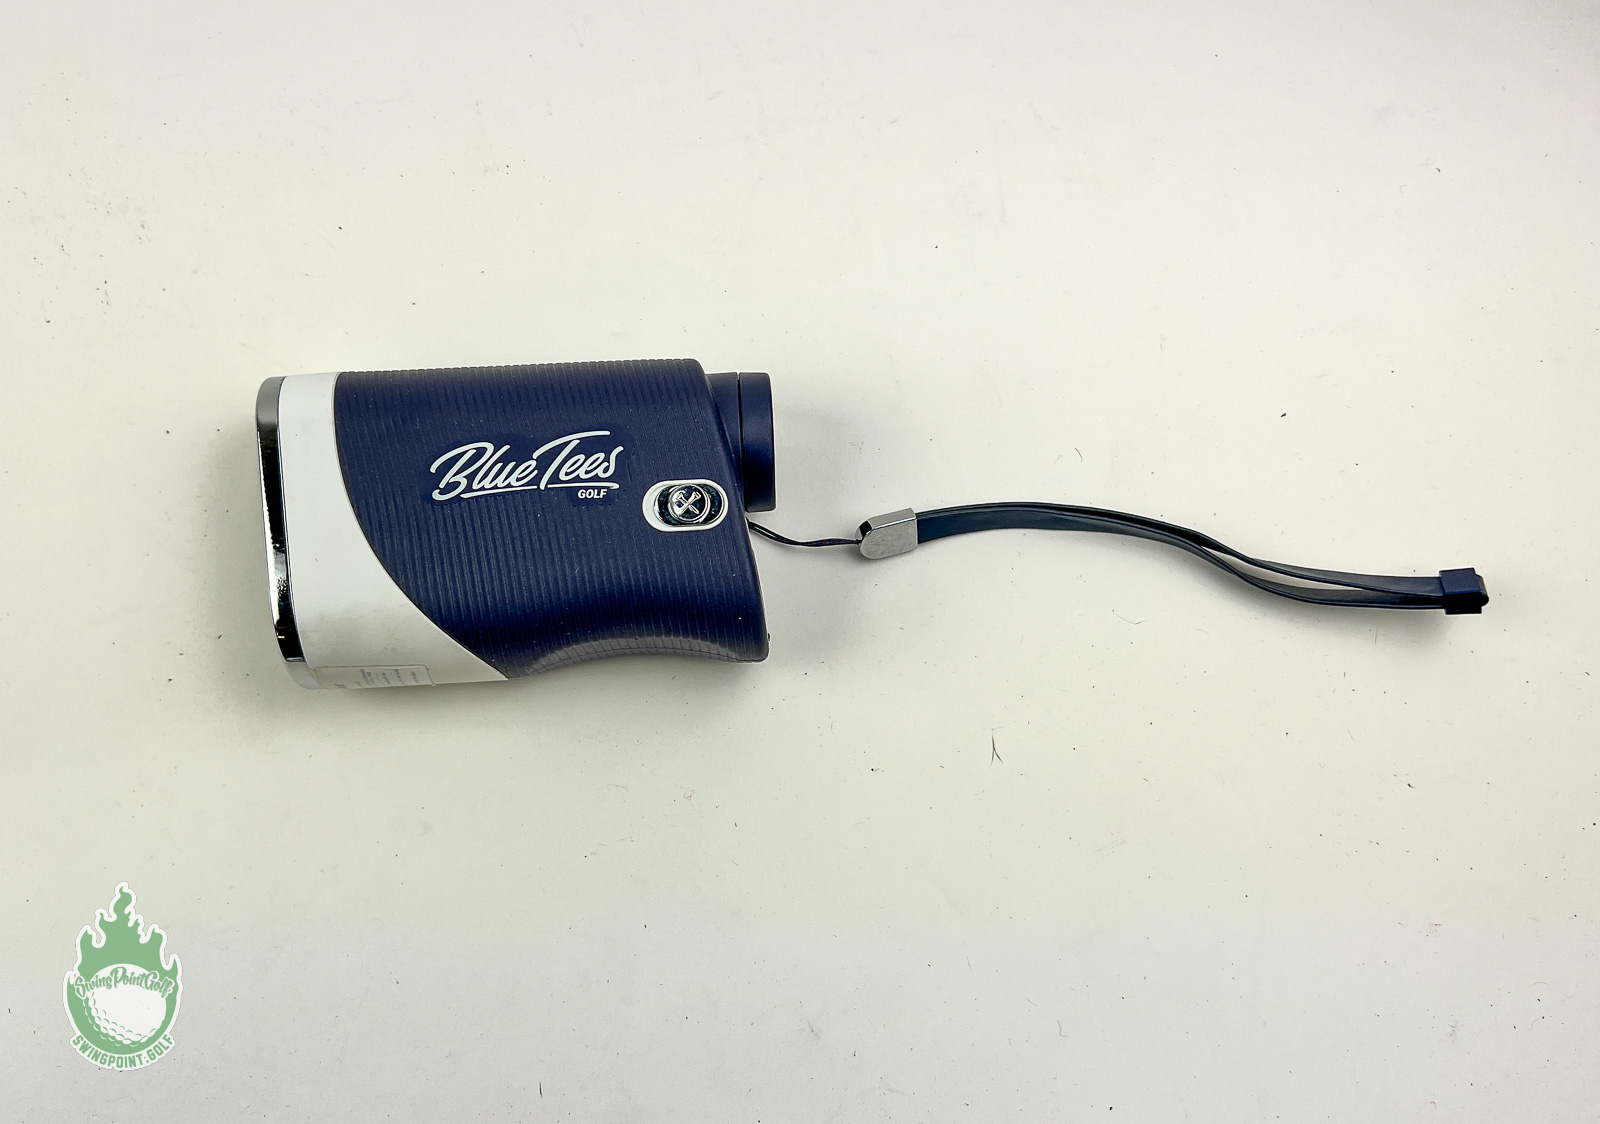 Used Blue Tees 3 Max Golf Rangefinder with Slope Switch and Lanyard · SwingPoint Golf®